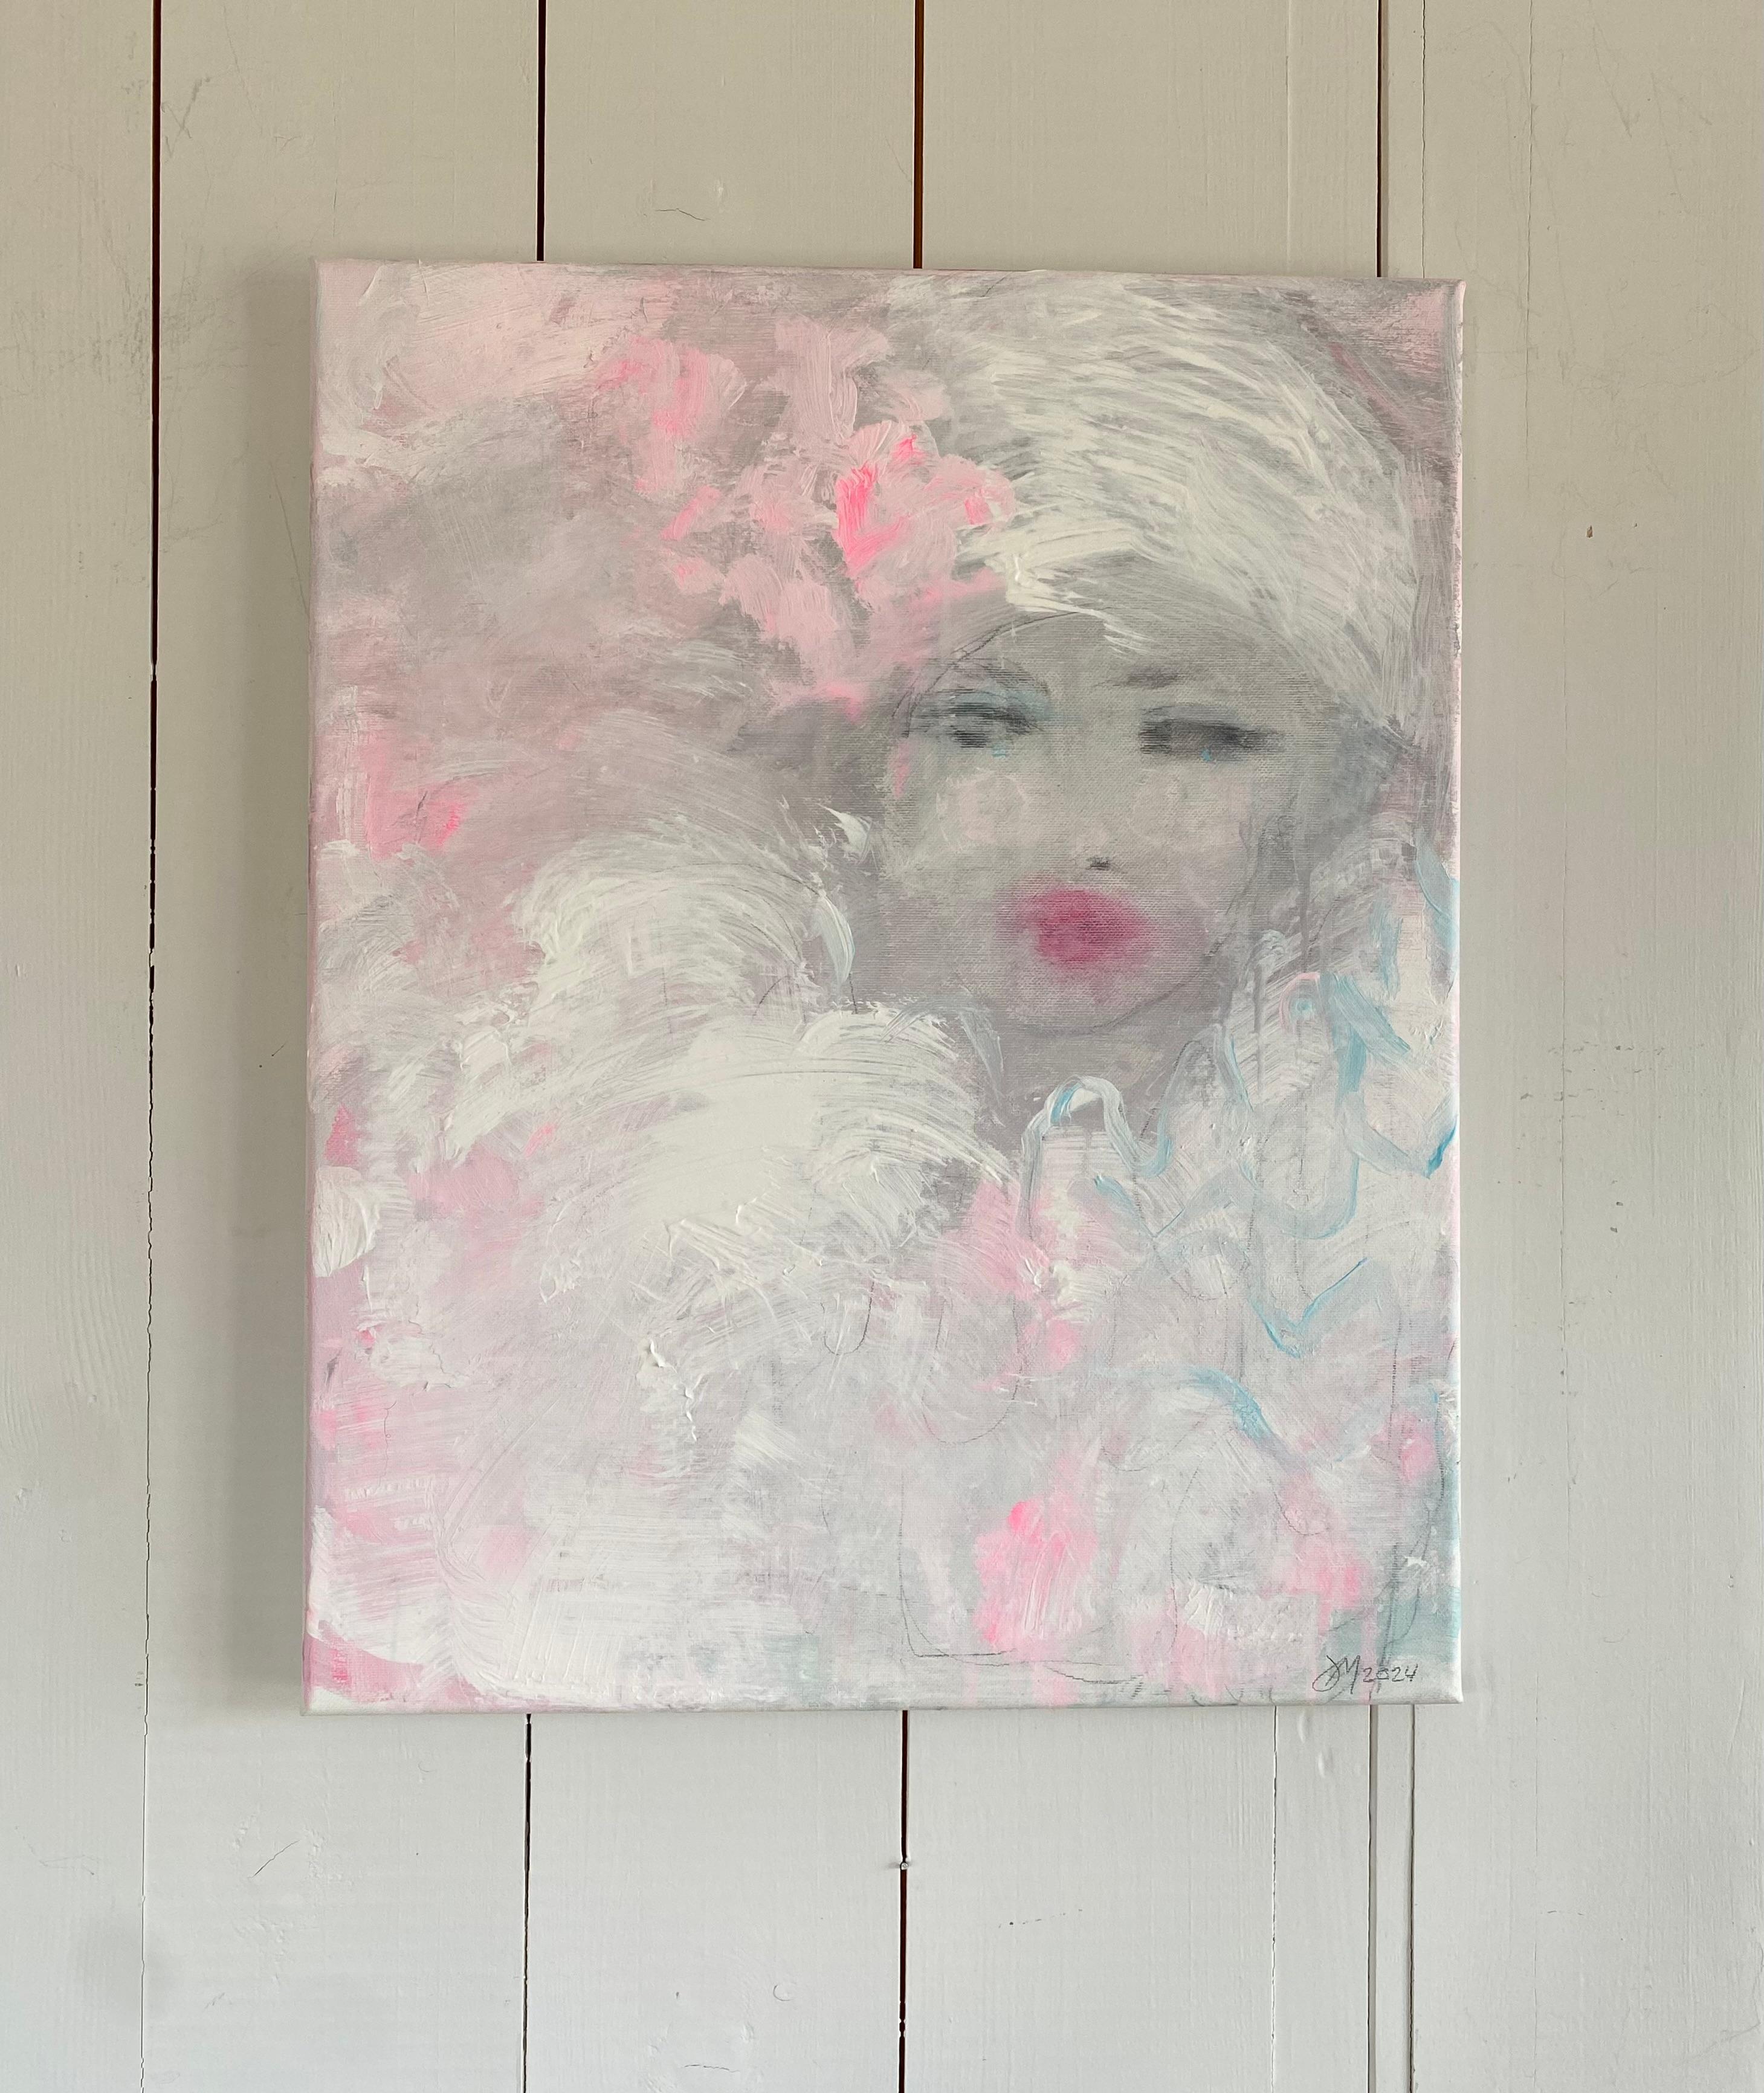 Acrylic painting on linen canvas. Inspired by the Circus.

The painting shows a blurred portrait of a female. Pastel blues, greys, pinks and white fill the composition with an ethereal blend of colour. The woman's lips pop with a more vibrant